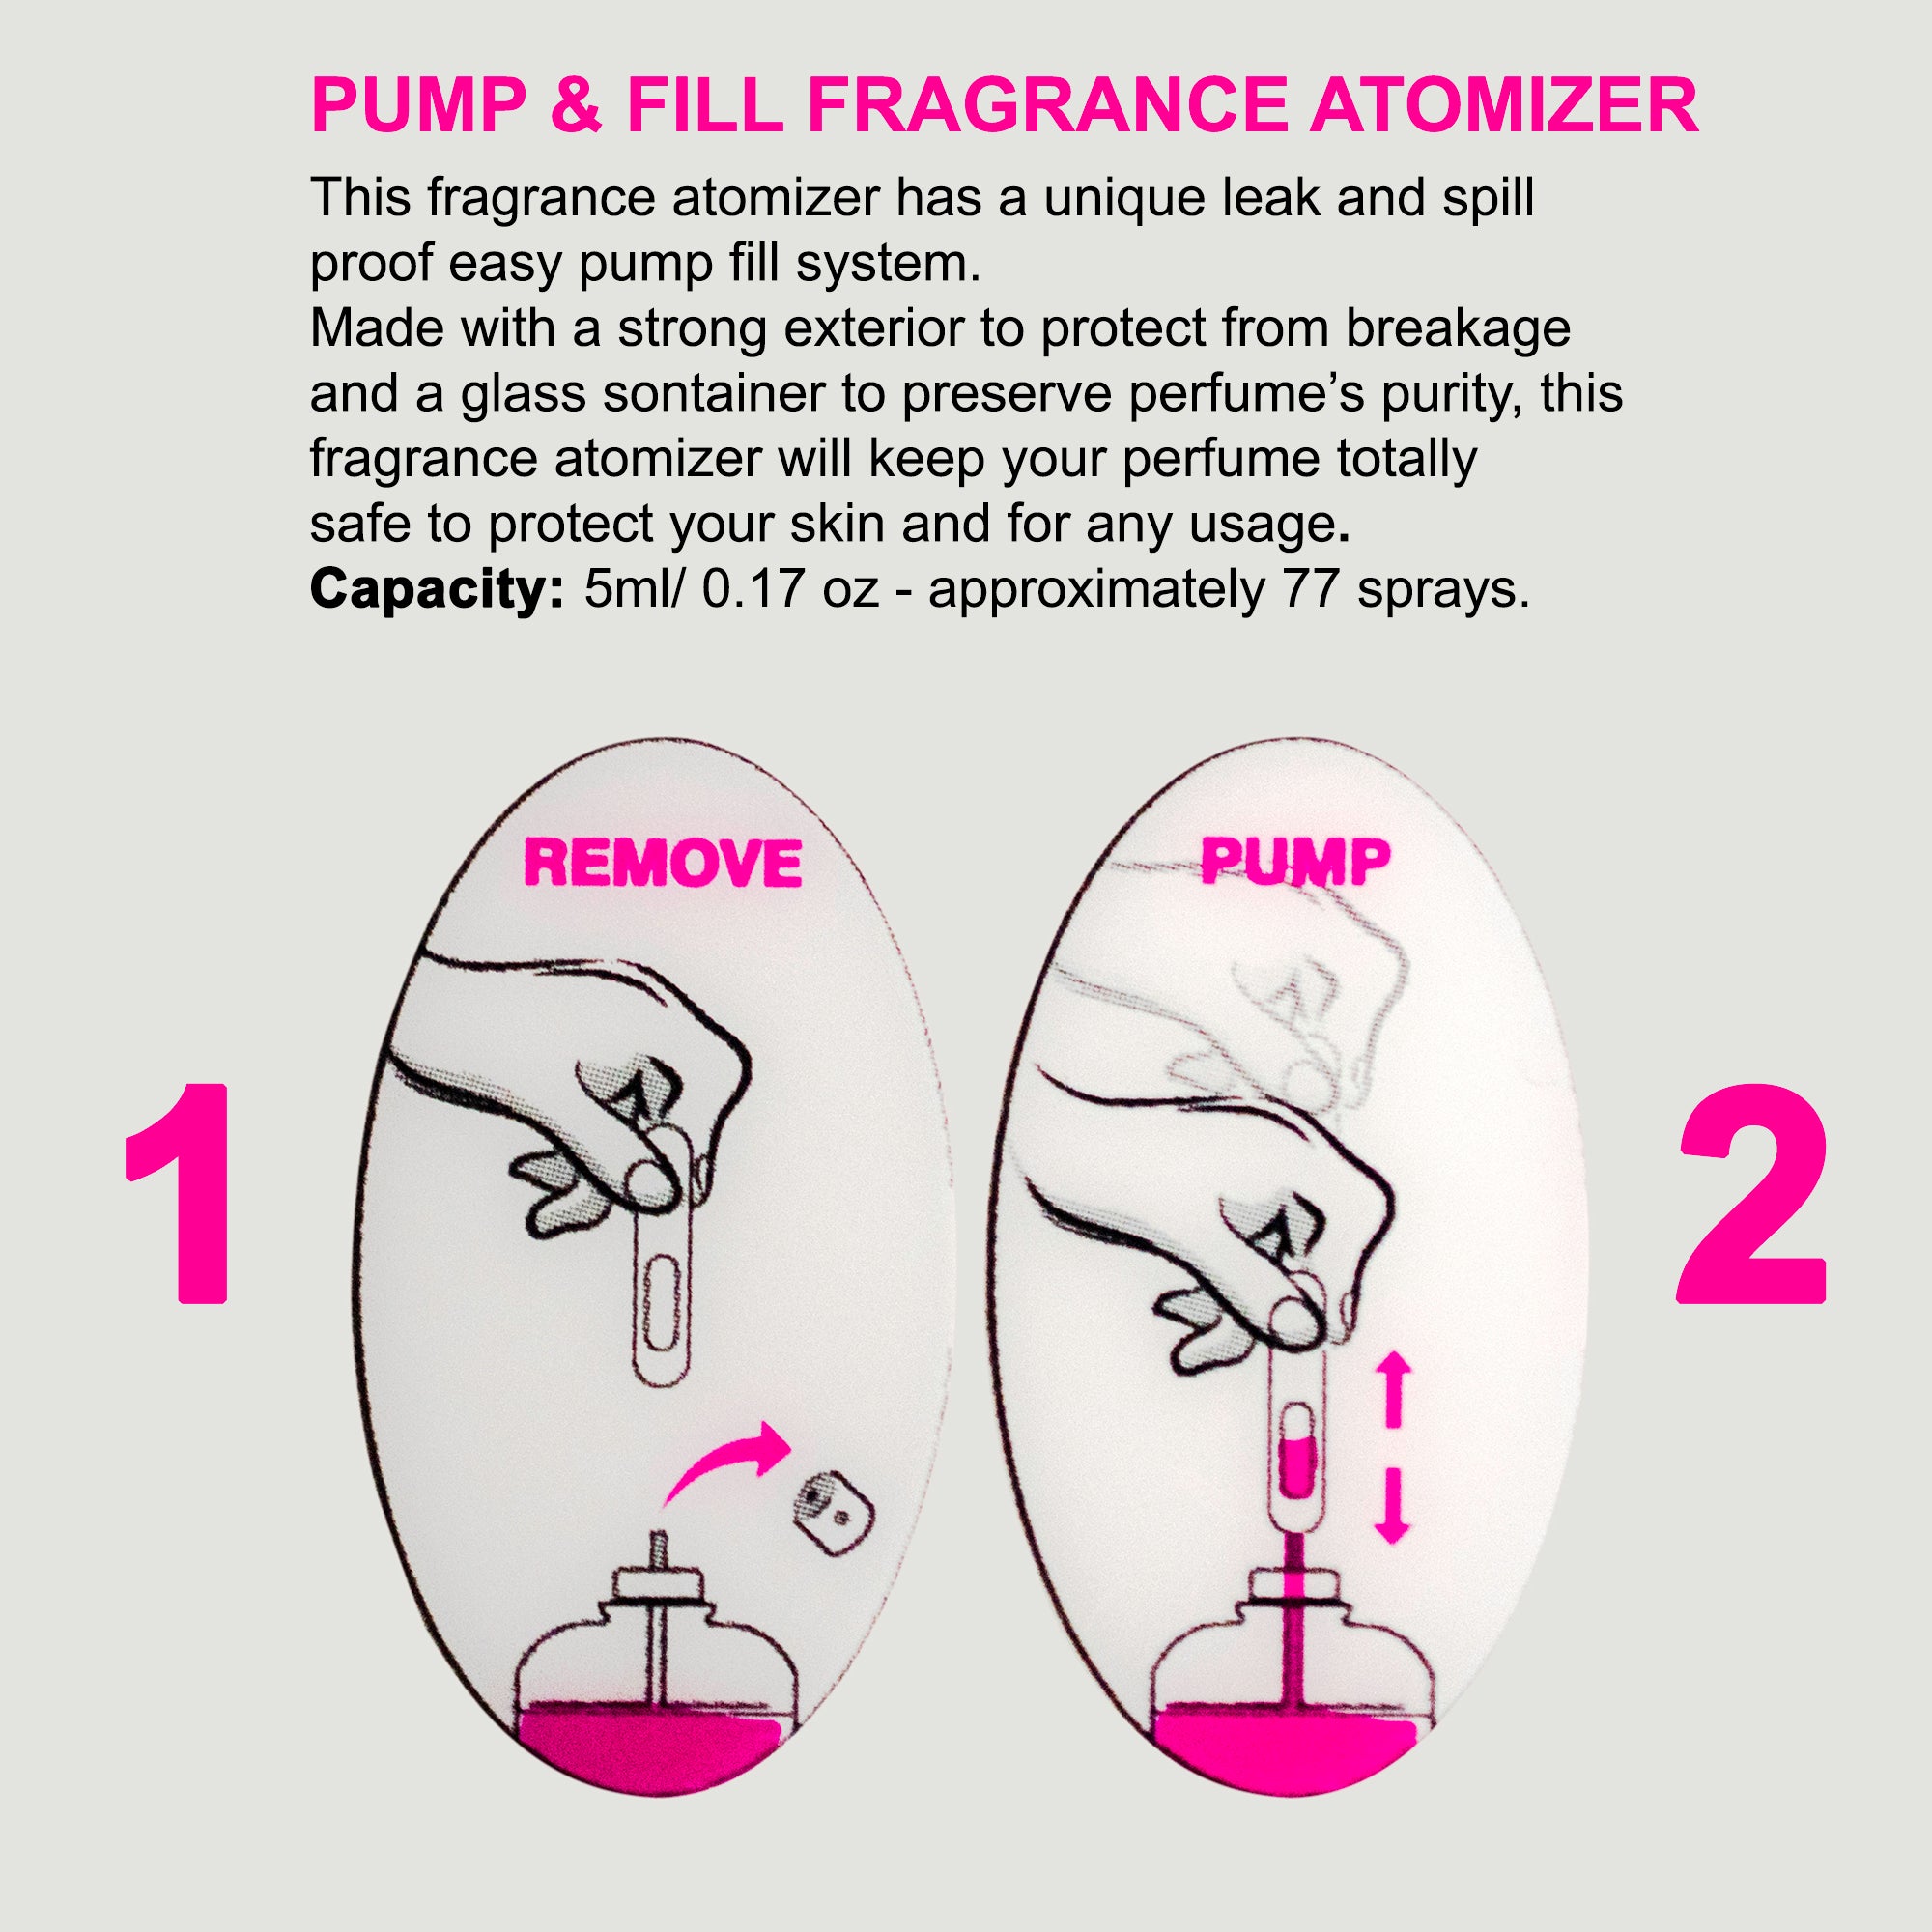 Pump and Fill Fragrance by – Perfumania Atomizer Flo